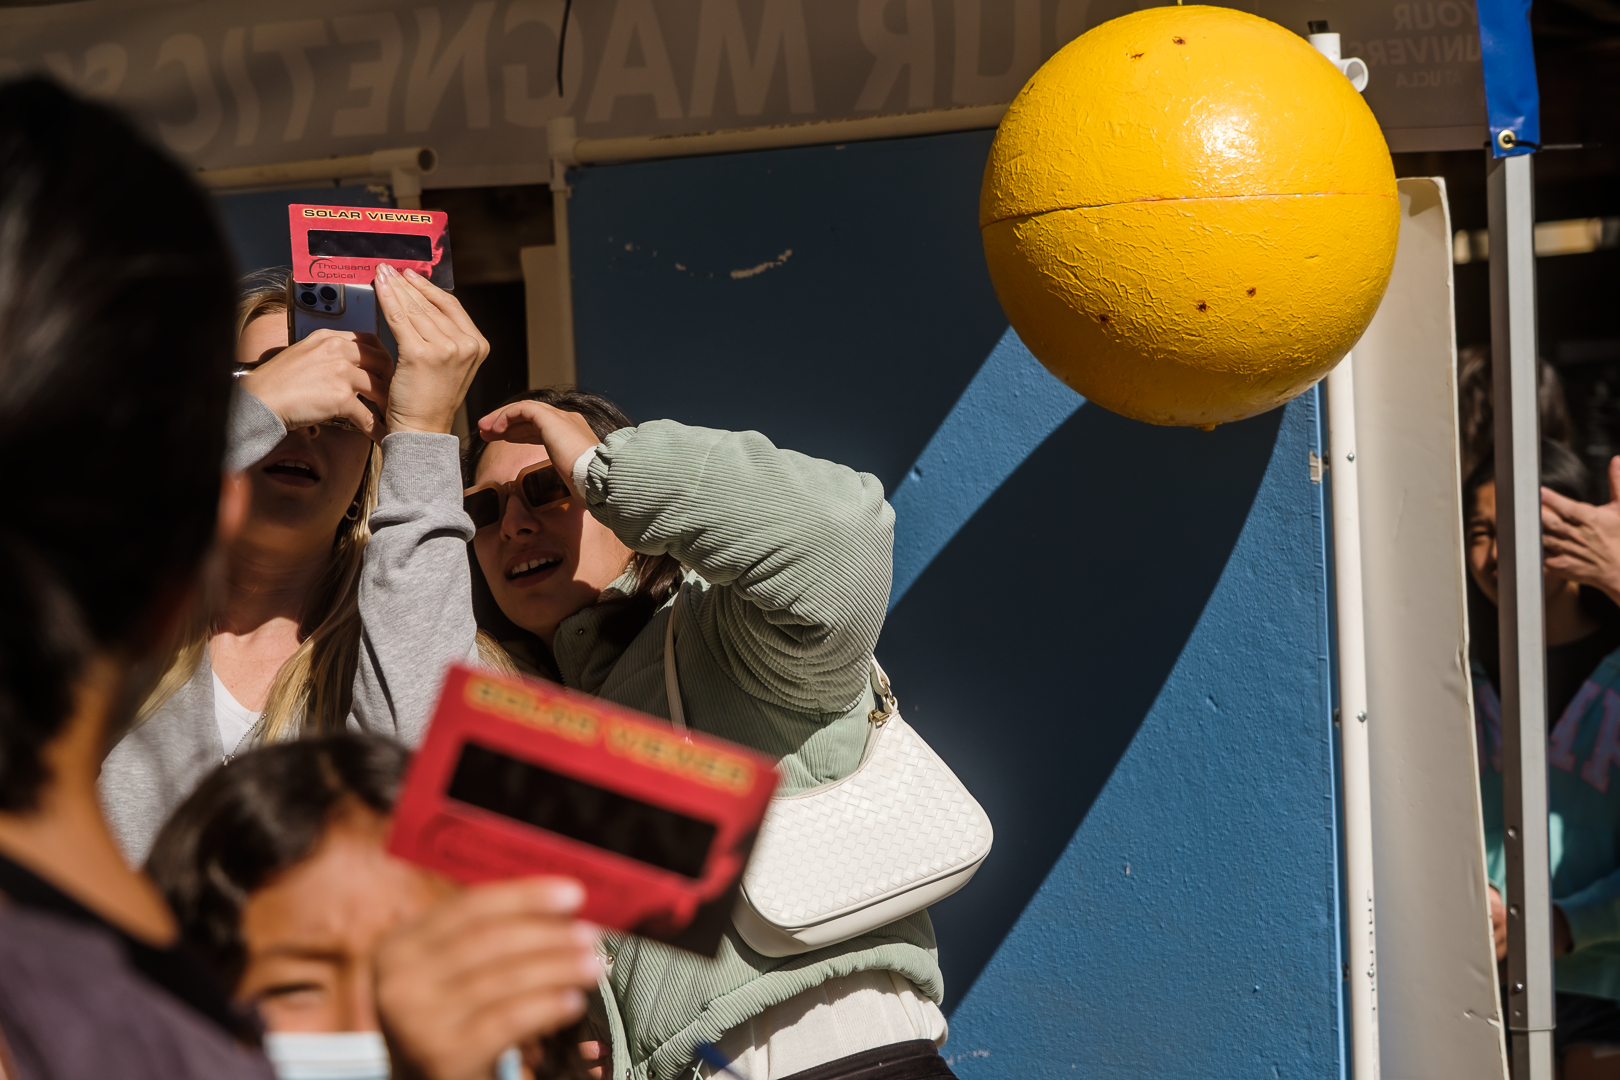 People hold handheld solar viewers in front of their eyes and look up at the sun.